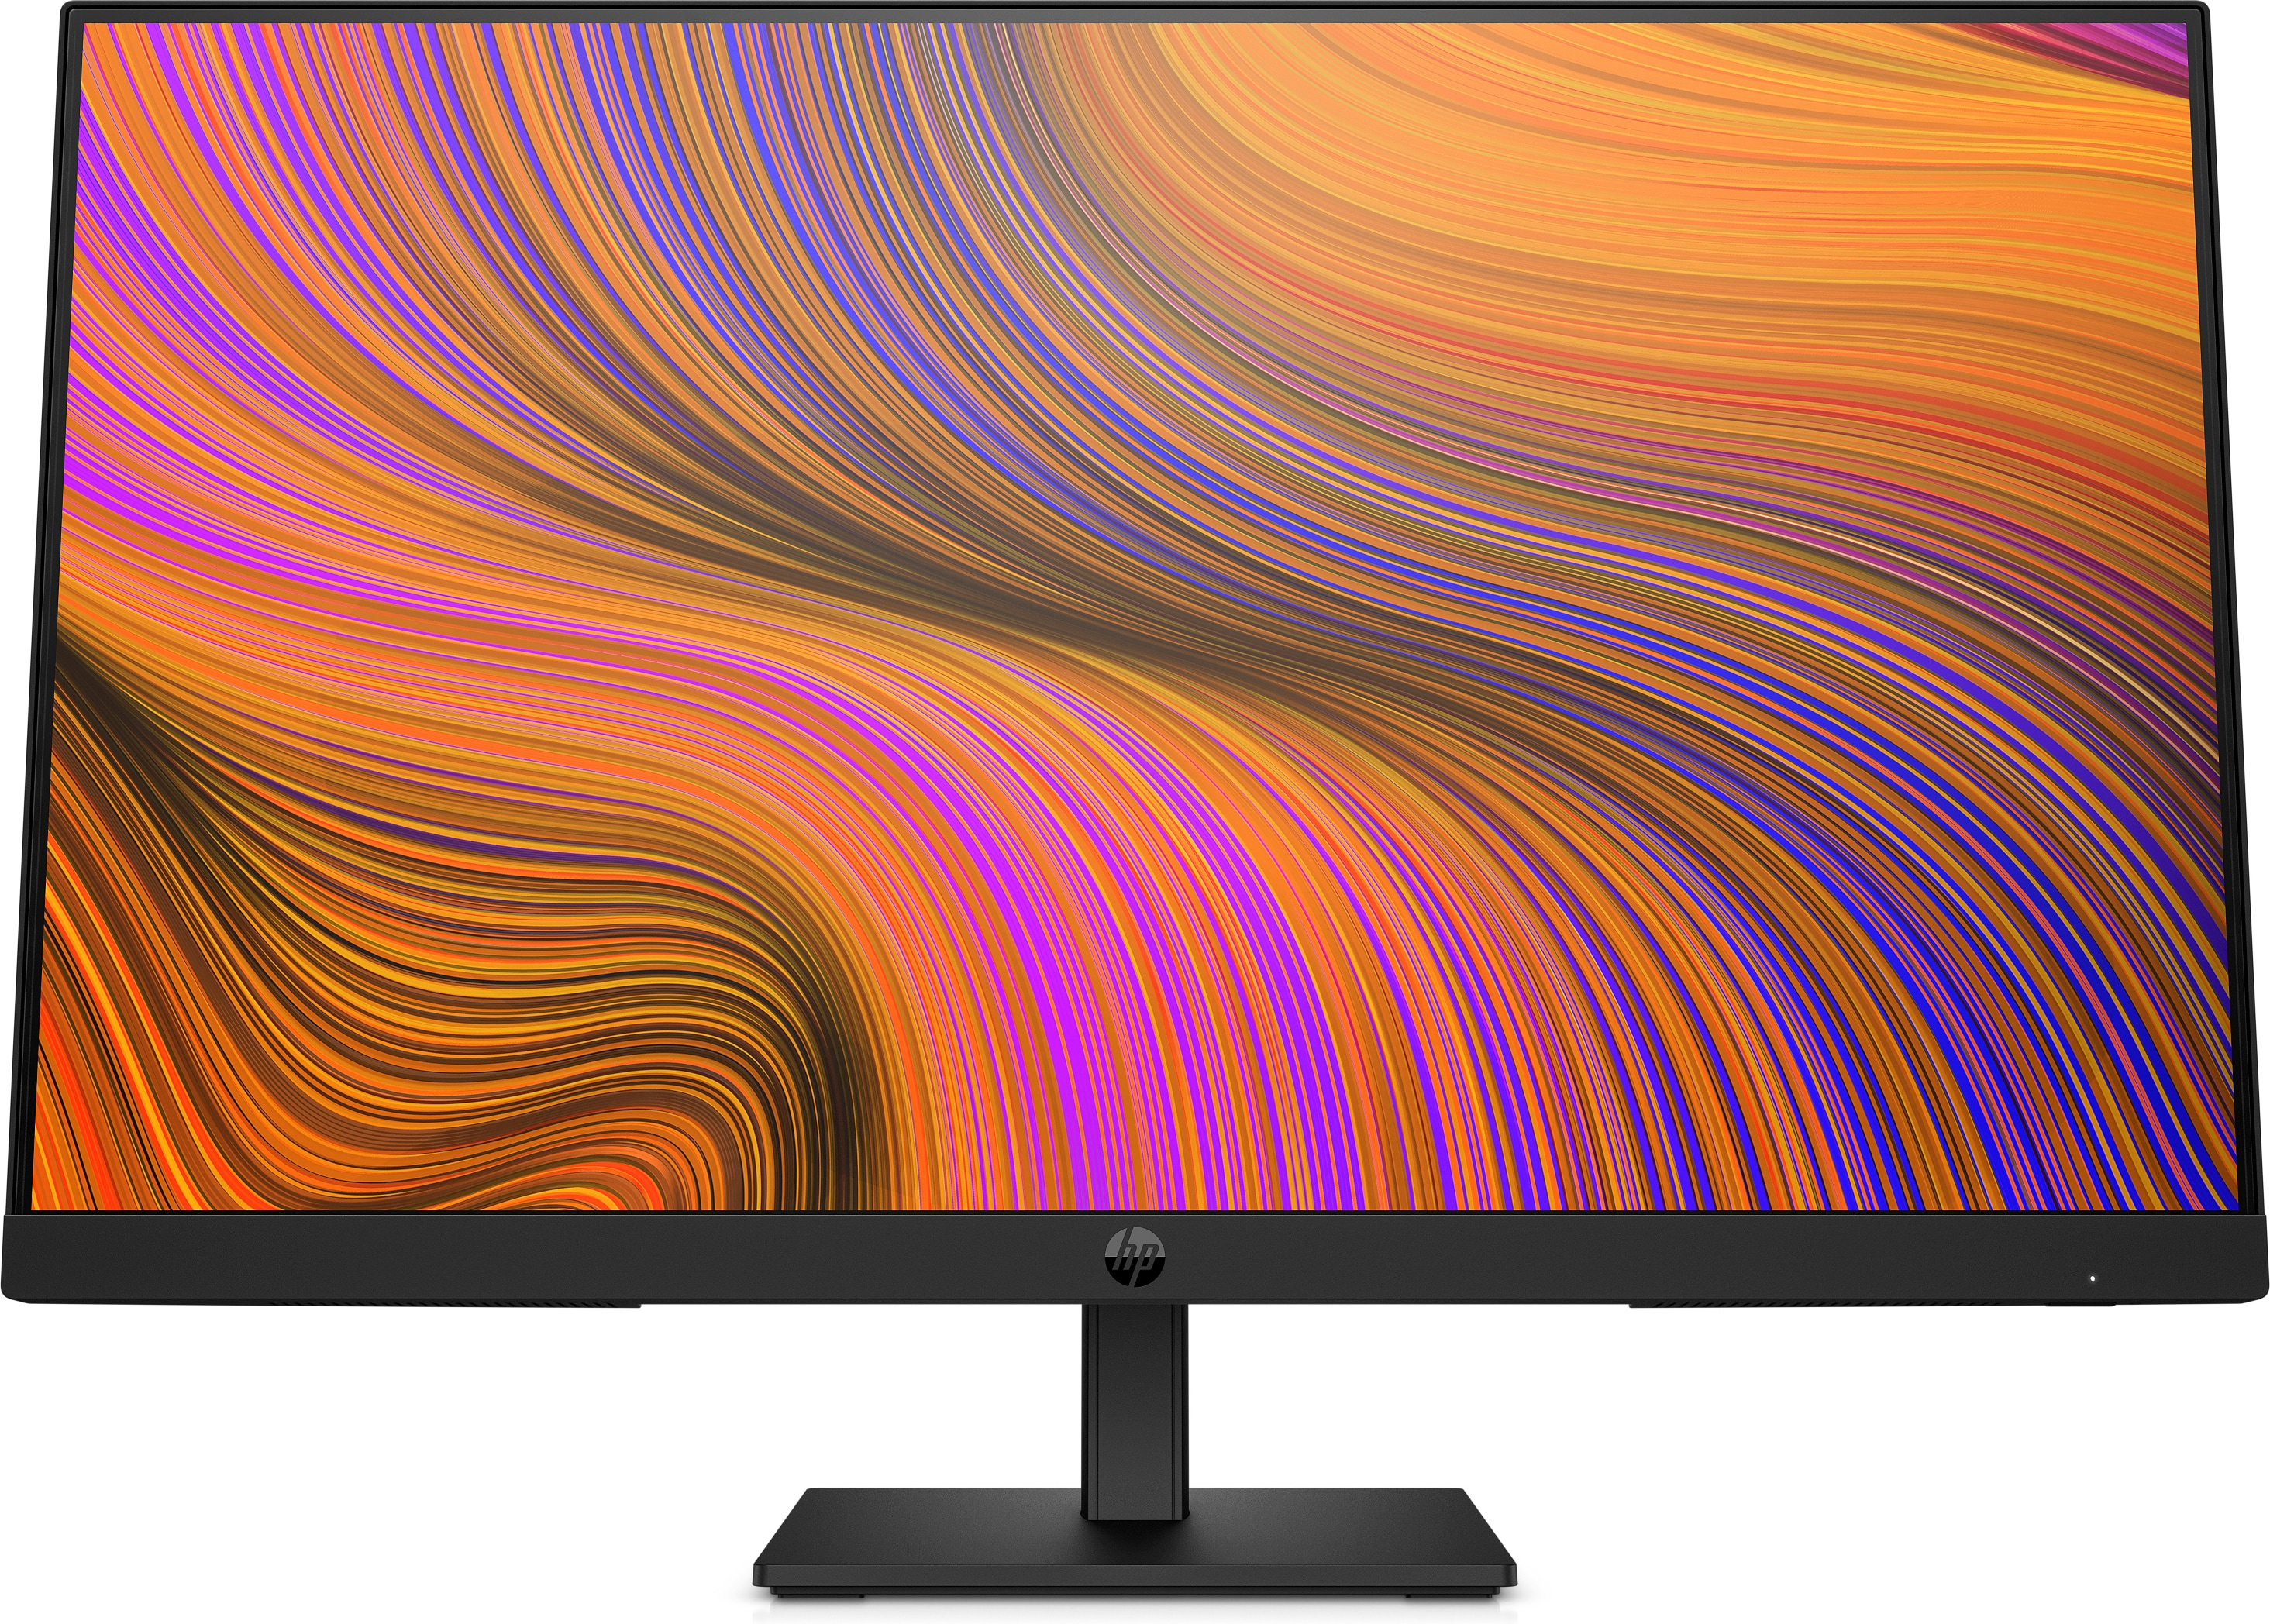 Image of HP P24h G5 FHD Monitor